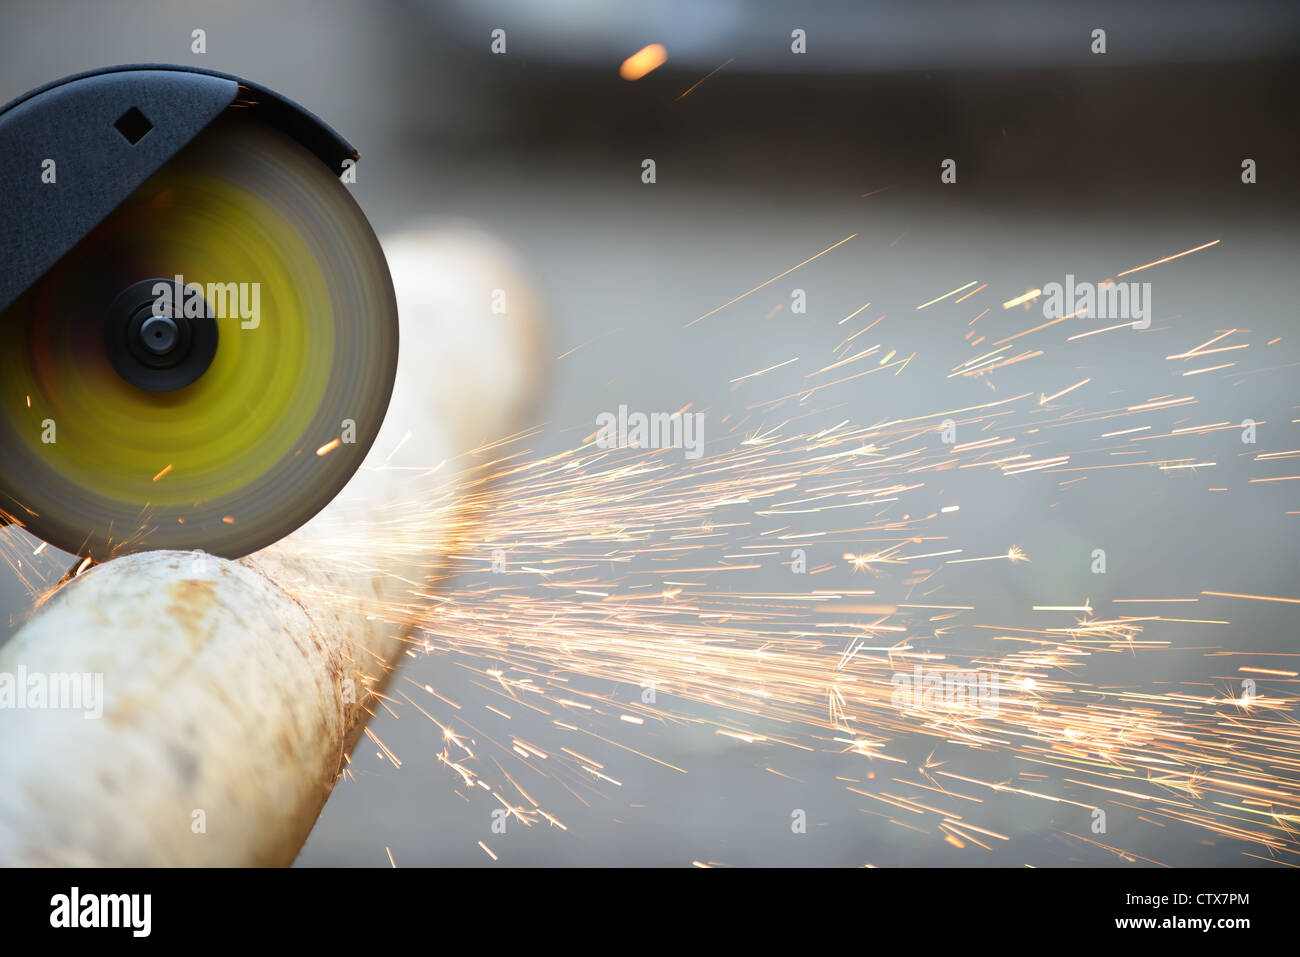 Cutting metal angle grinder, sparks from the disk. Photo close-up Stock Photo